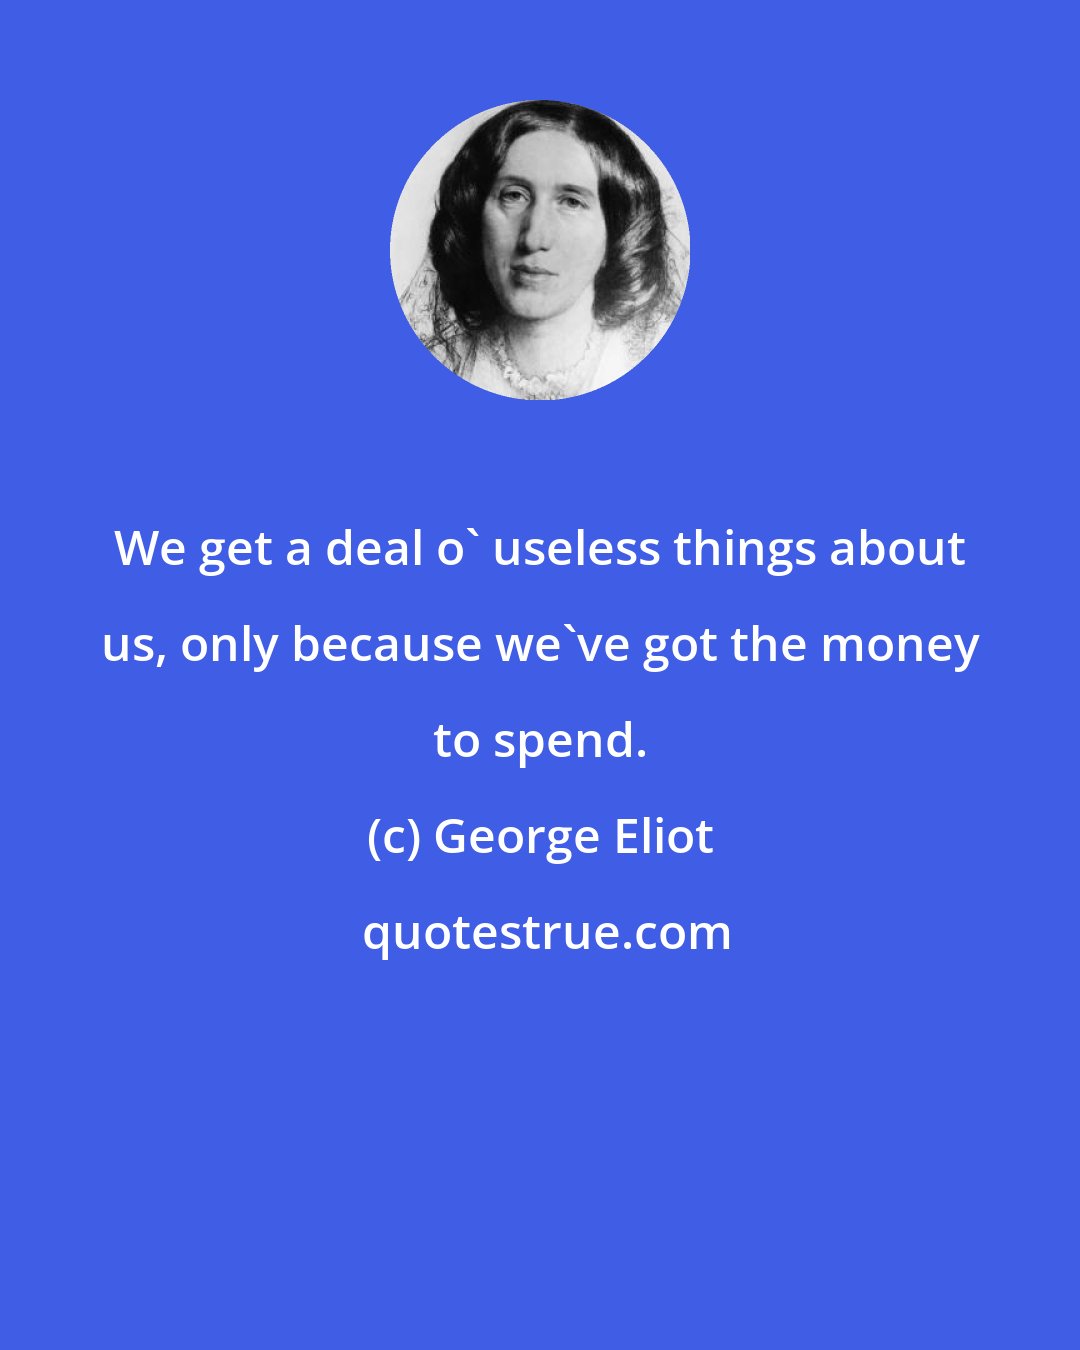 George Eliot: We get a deal o' useless things about us, only because we've got the money to spend.